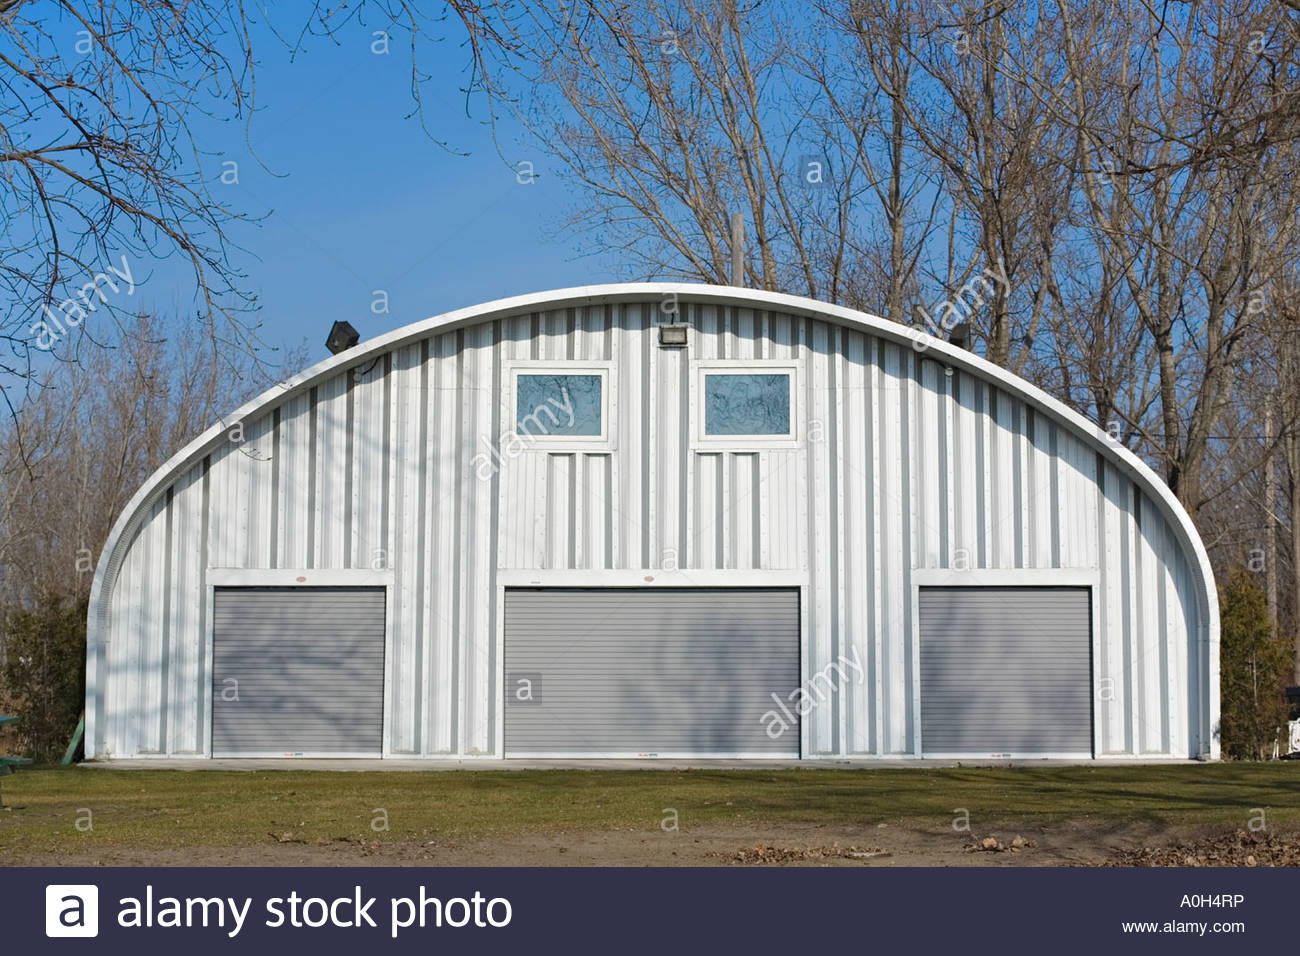 Quonset hut the basic building of Canadian north this one ...